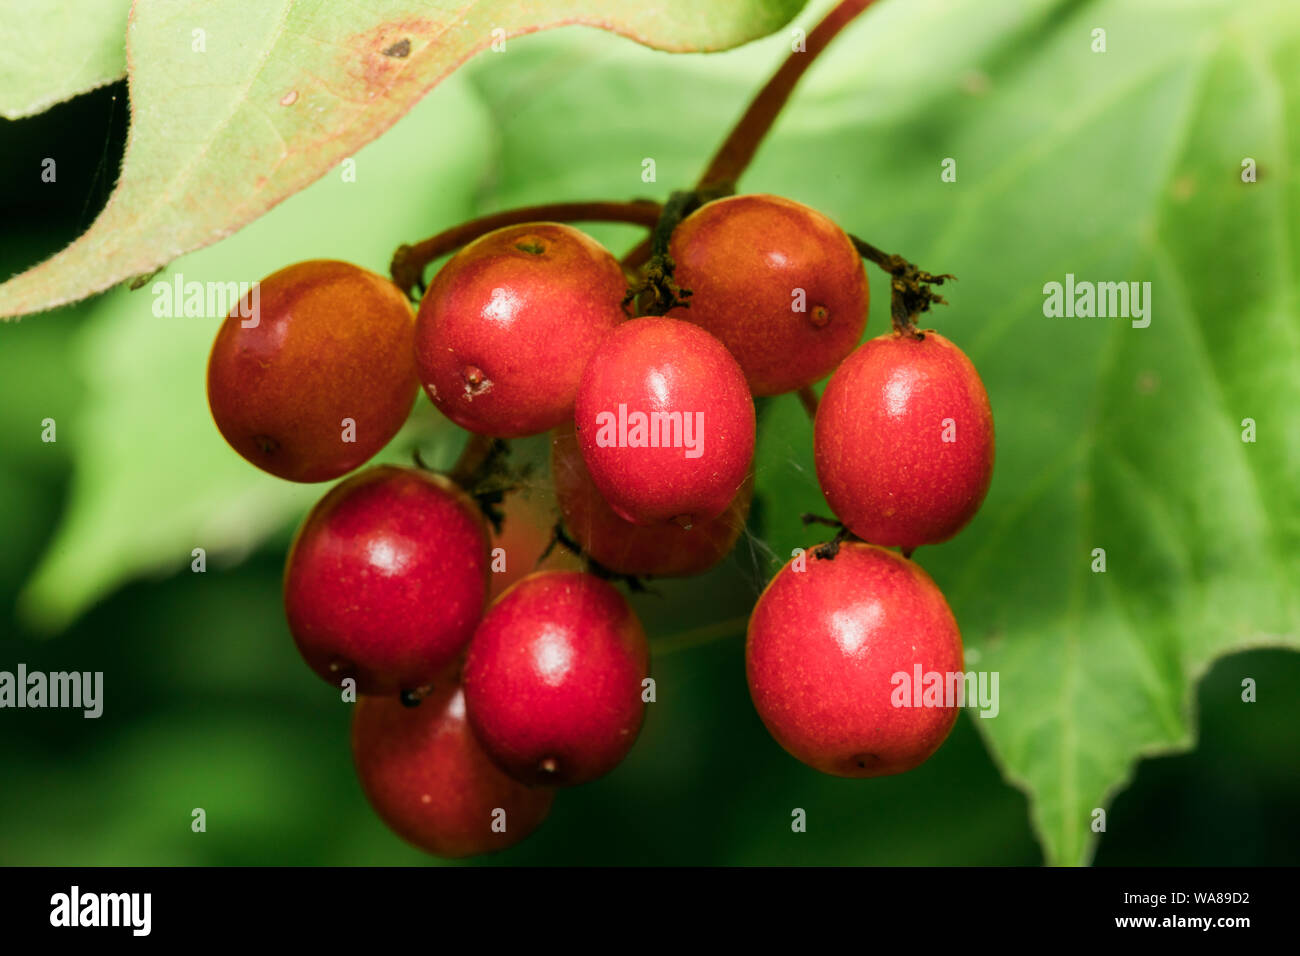 a close up shot of a red wild berry Stock Photo